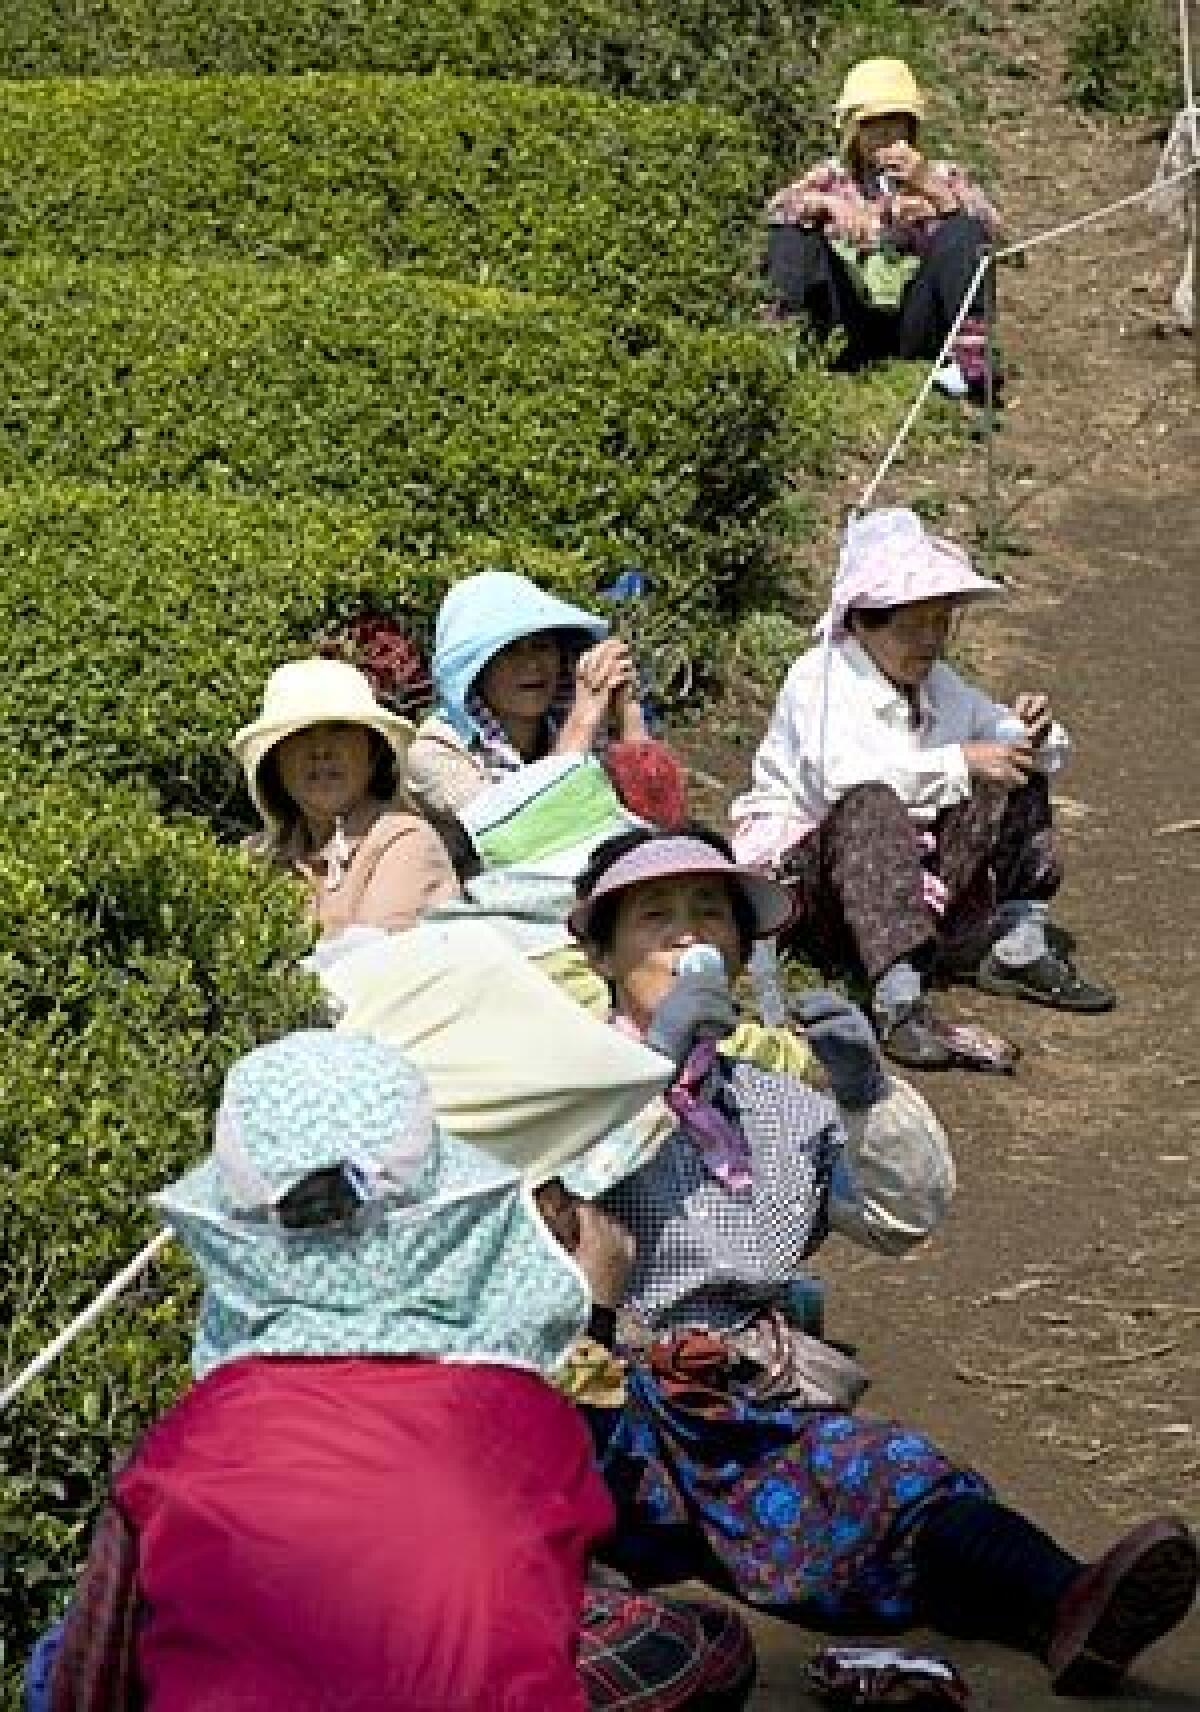 BREATHER: Women painstakingly harvest the tea by picking one leaf at a time, taking an occasional break.